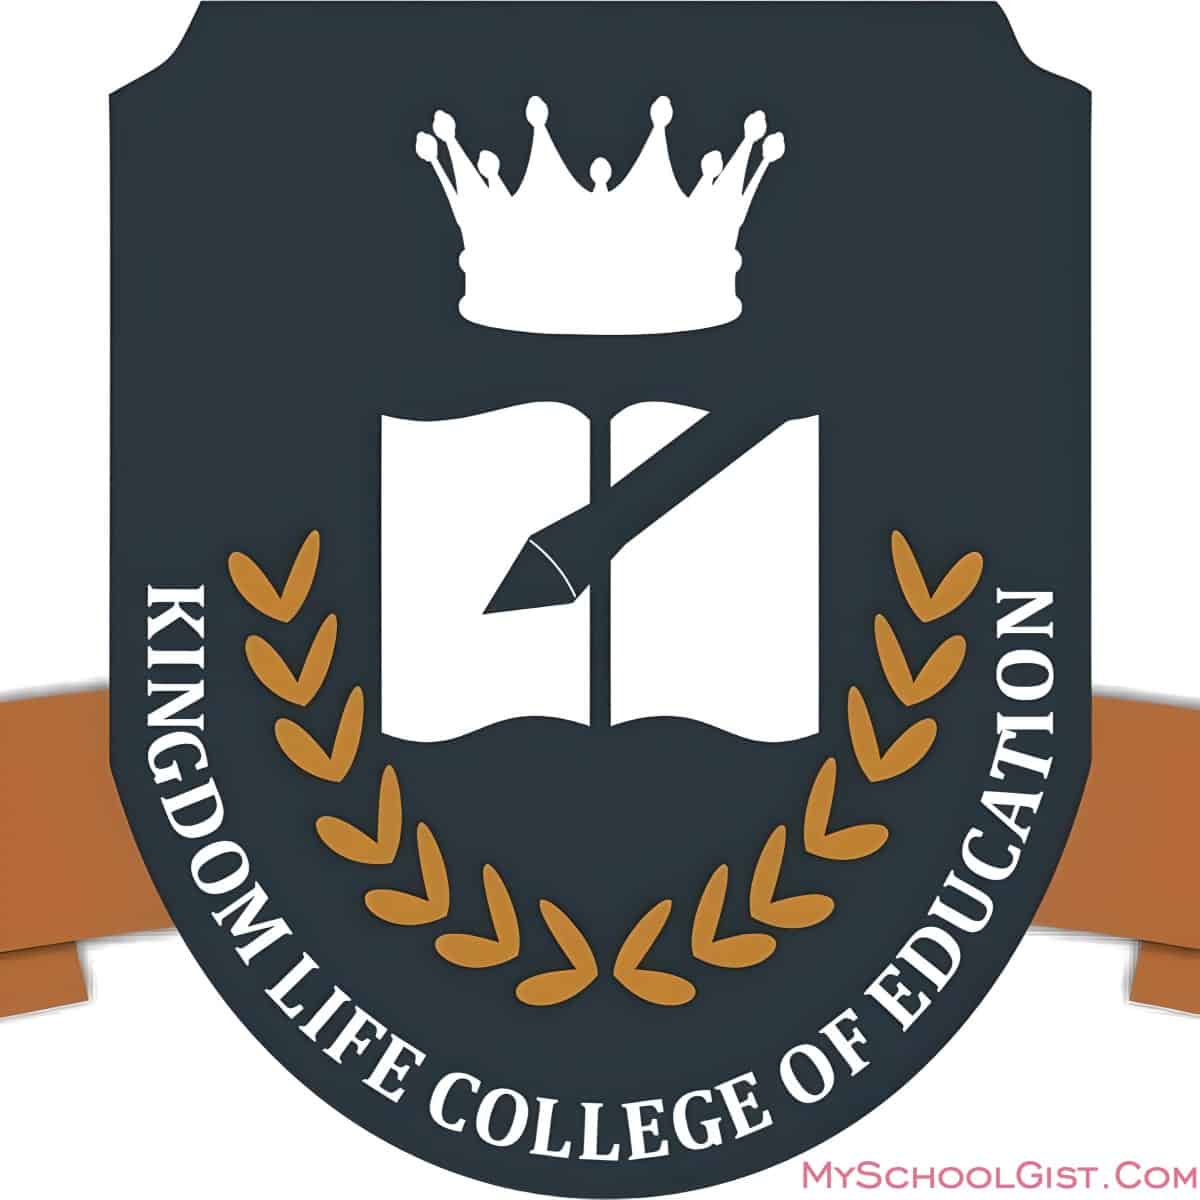 Kingdom Life College of Education Convocation and Matriculation Ceremony